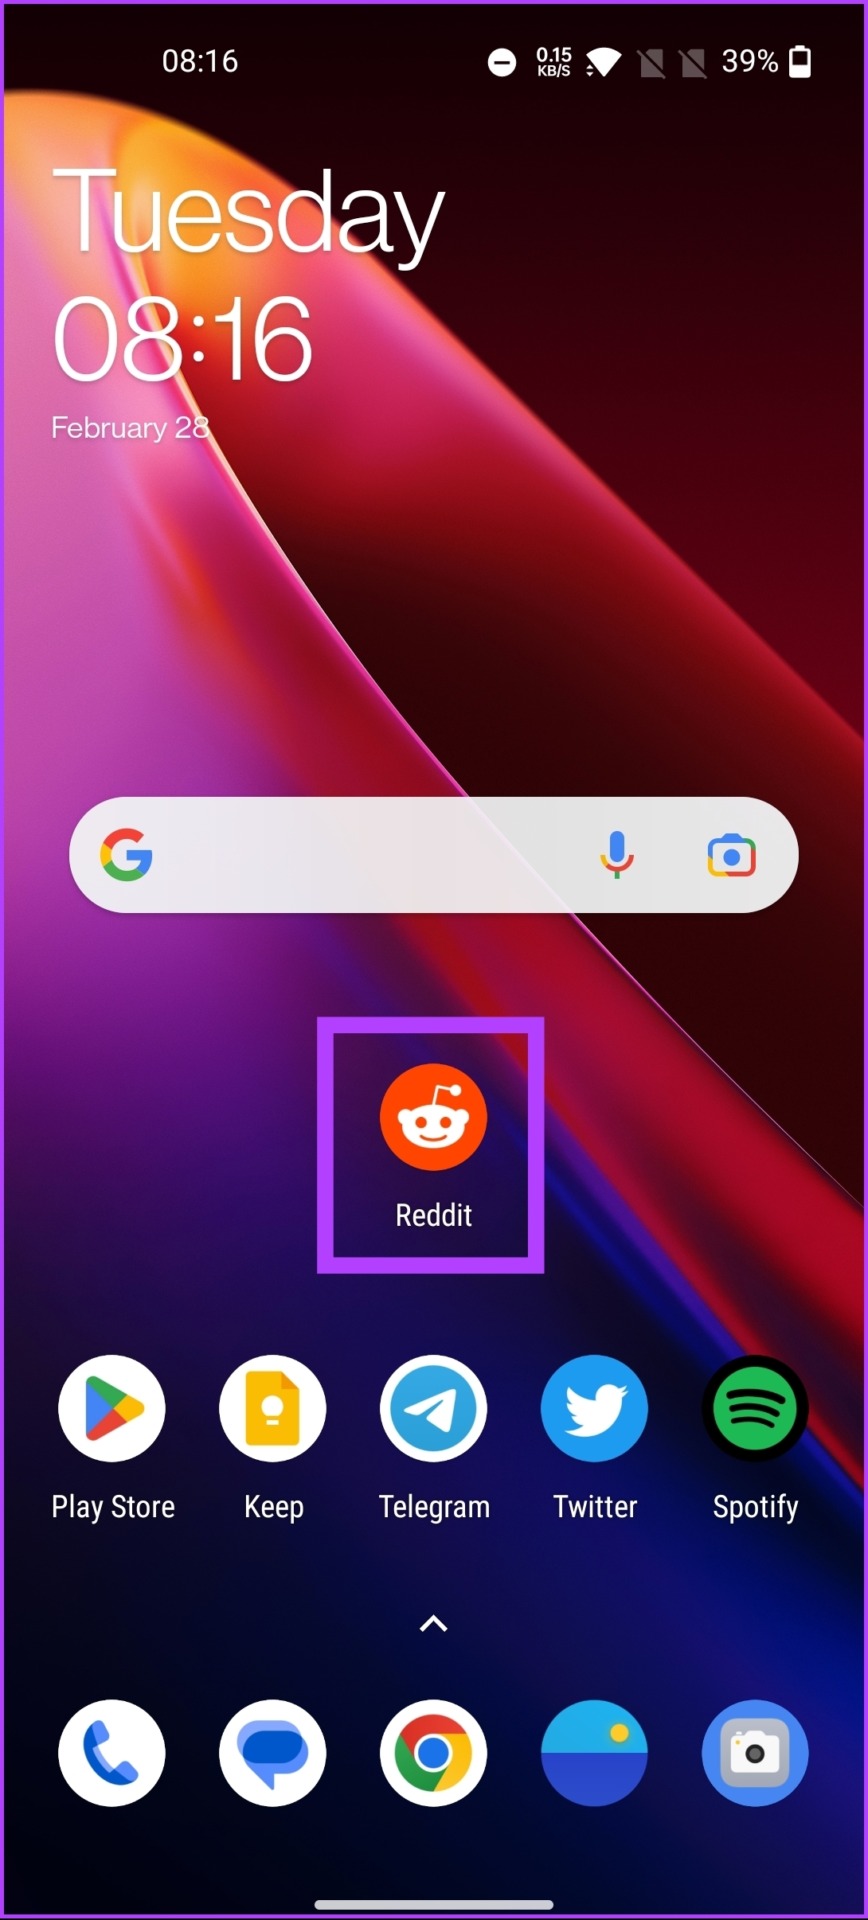 Open the Reddit app on your Android or iOS device.